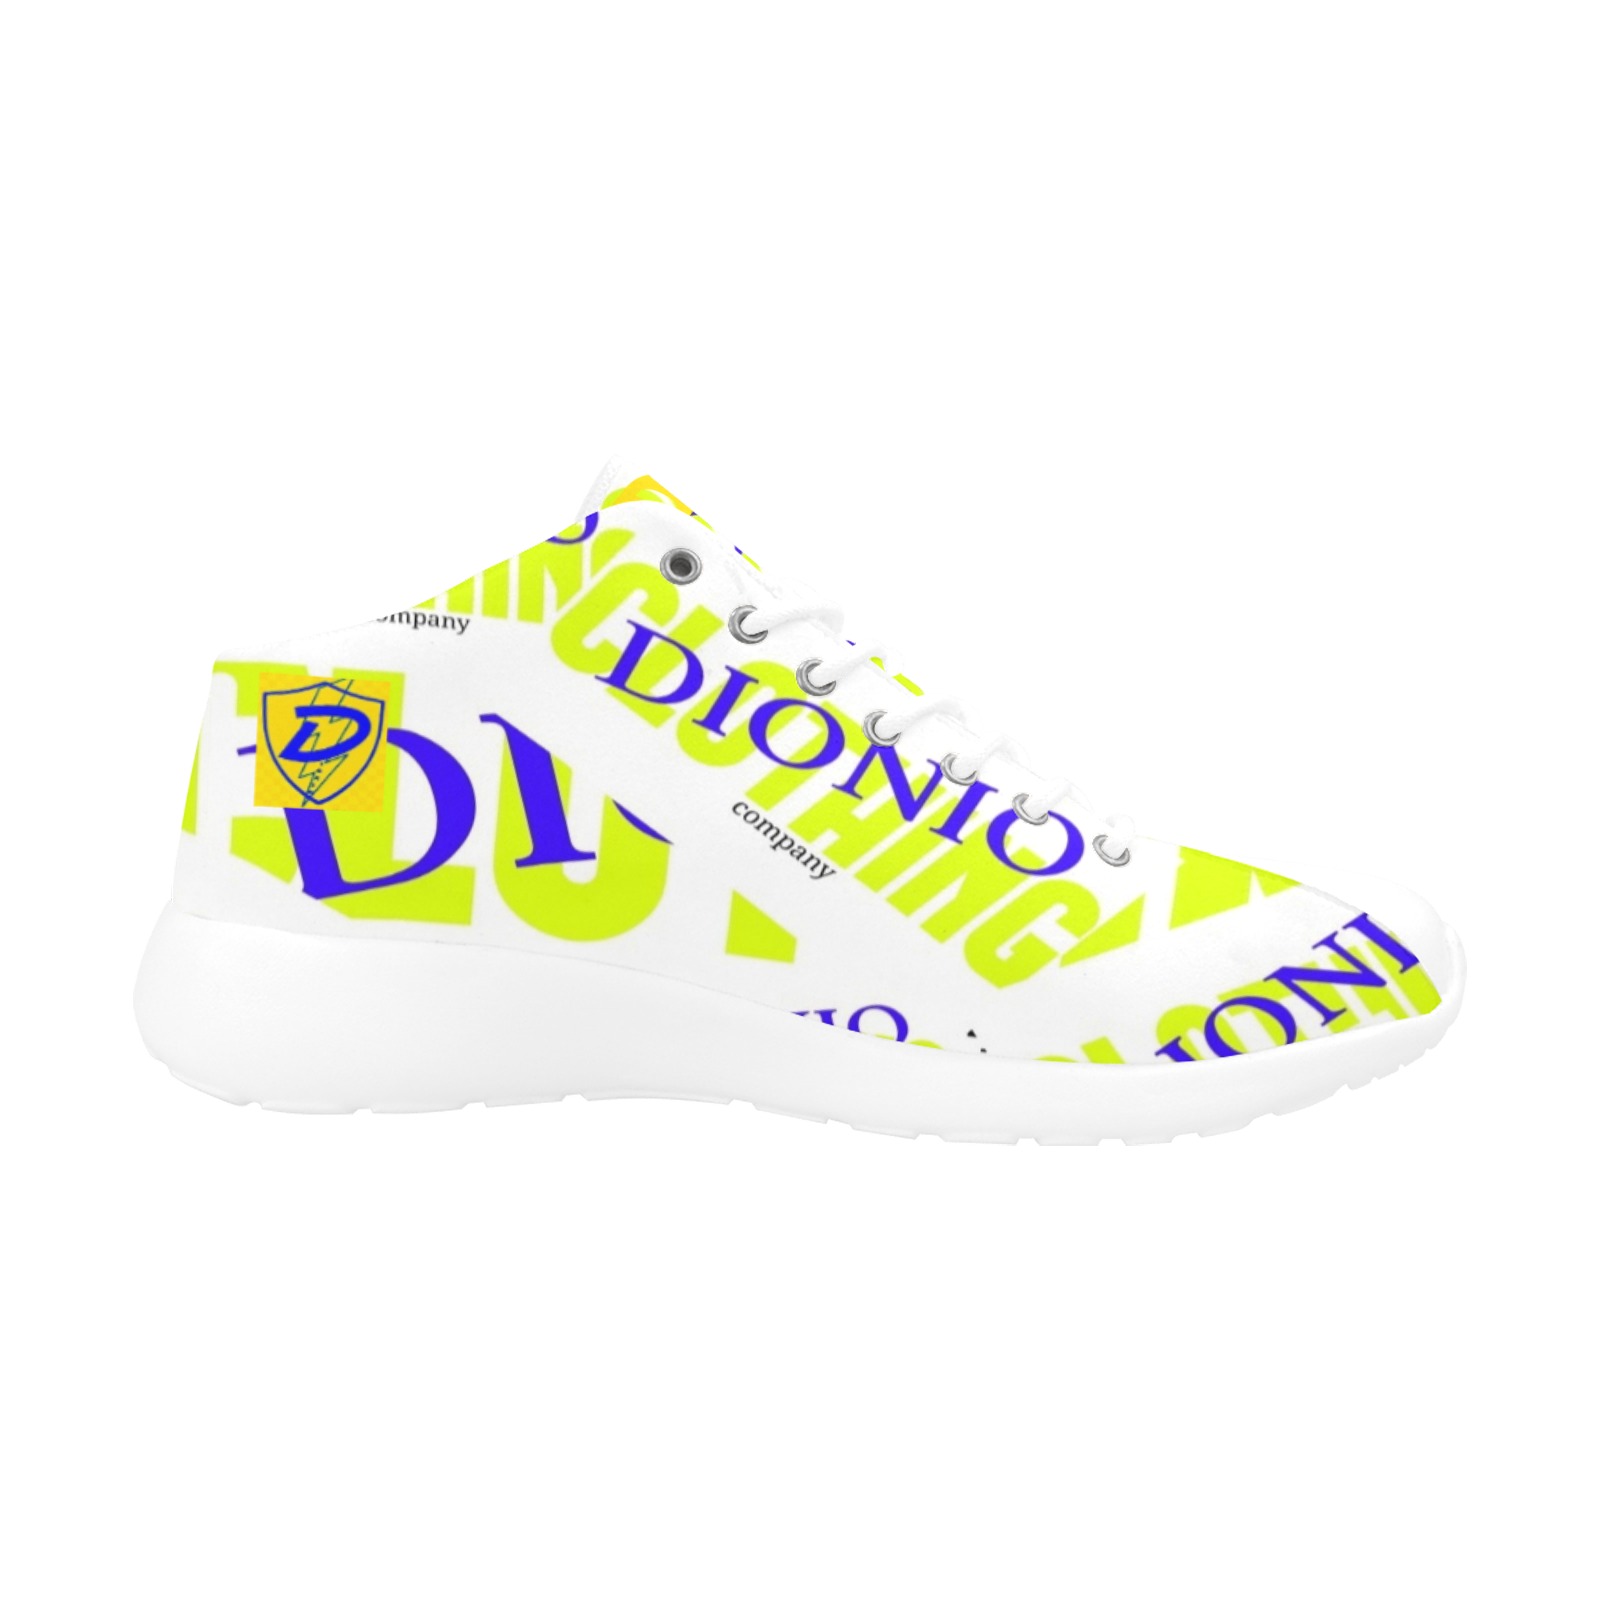 DIONIO - Company Sneakers (White,Blue, & Yelow) Men's Basketball Training Shoes (Model 47502)